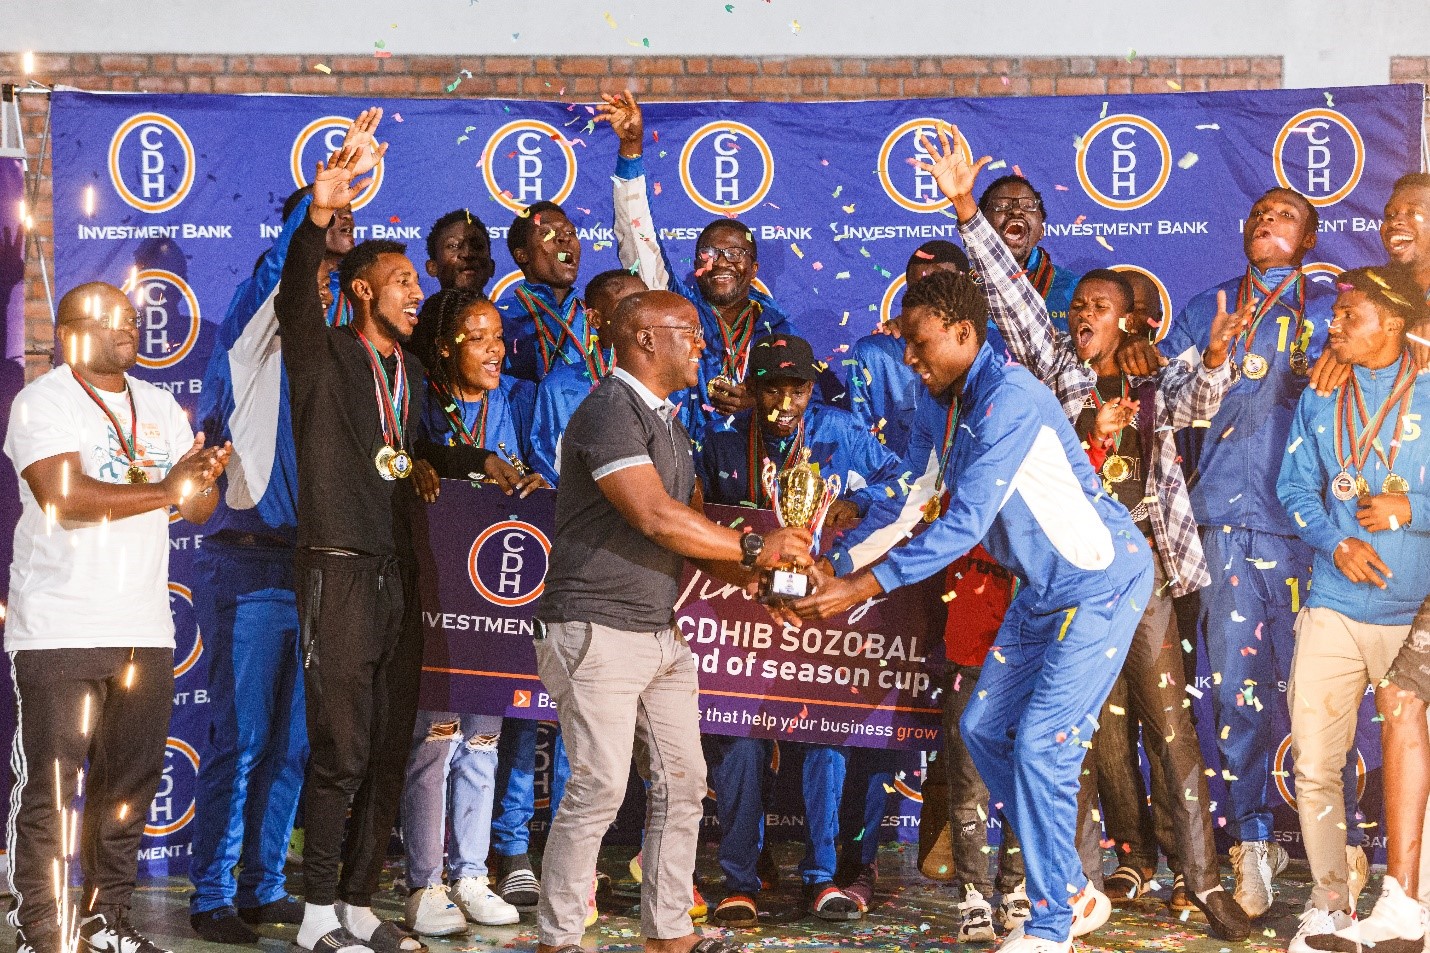 Crazy Warriors receiving the champion’s trophy for the CDHIB SOZOBAL end of season cup from CDH Investment Bank Deputy Chief Executive Officer/Executive Director, Mr Thoko Mkavea